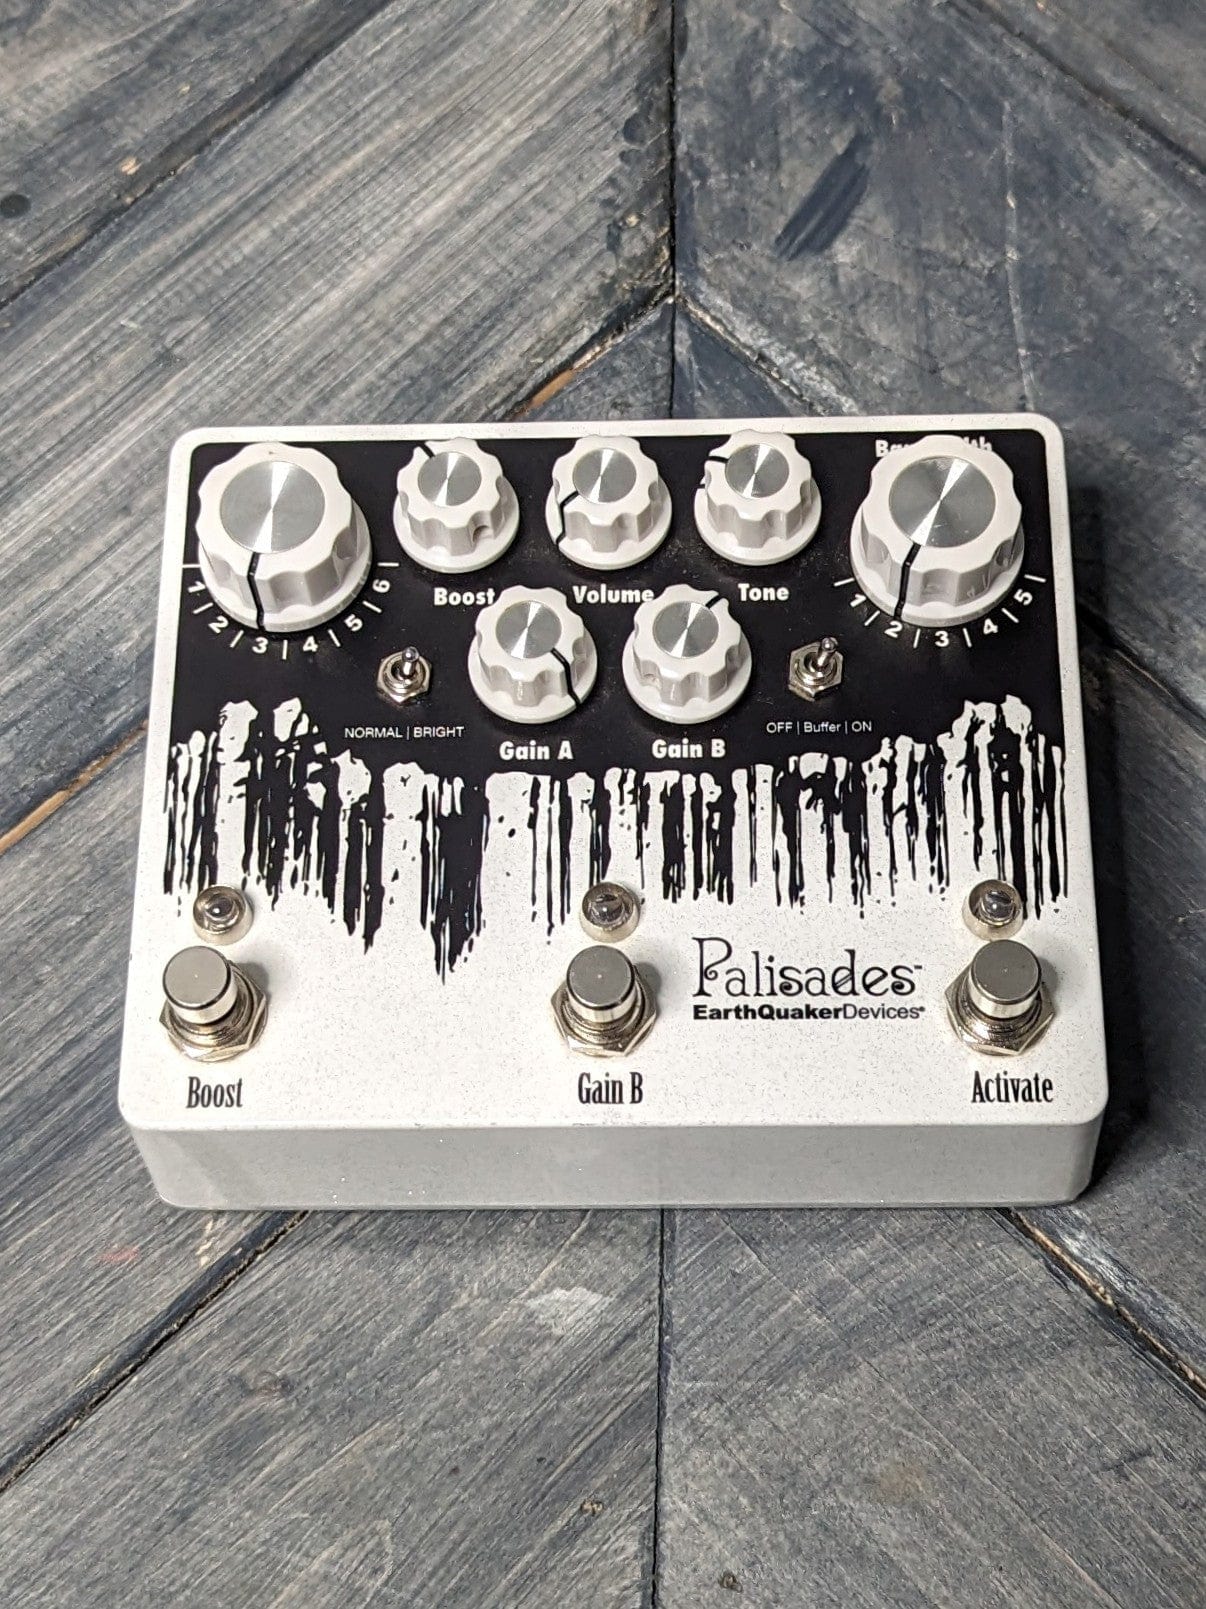 Used Earthquaker Devices Palisades top of the pedal 